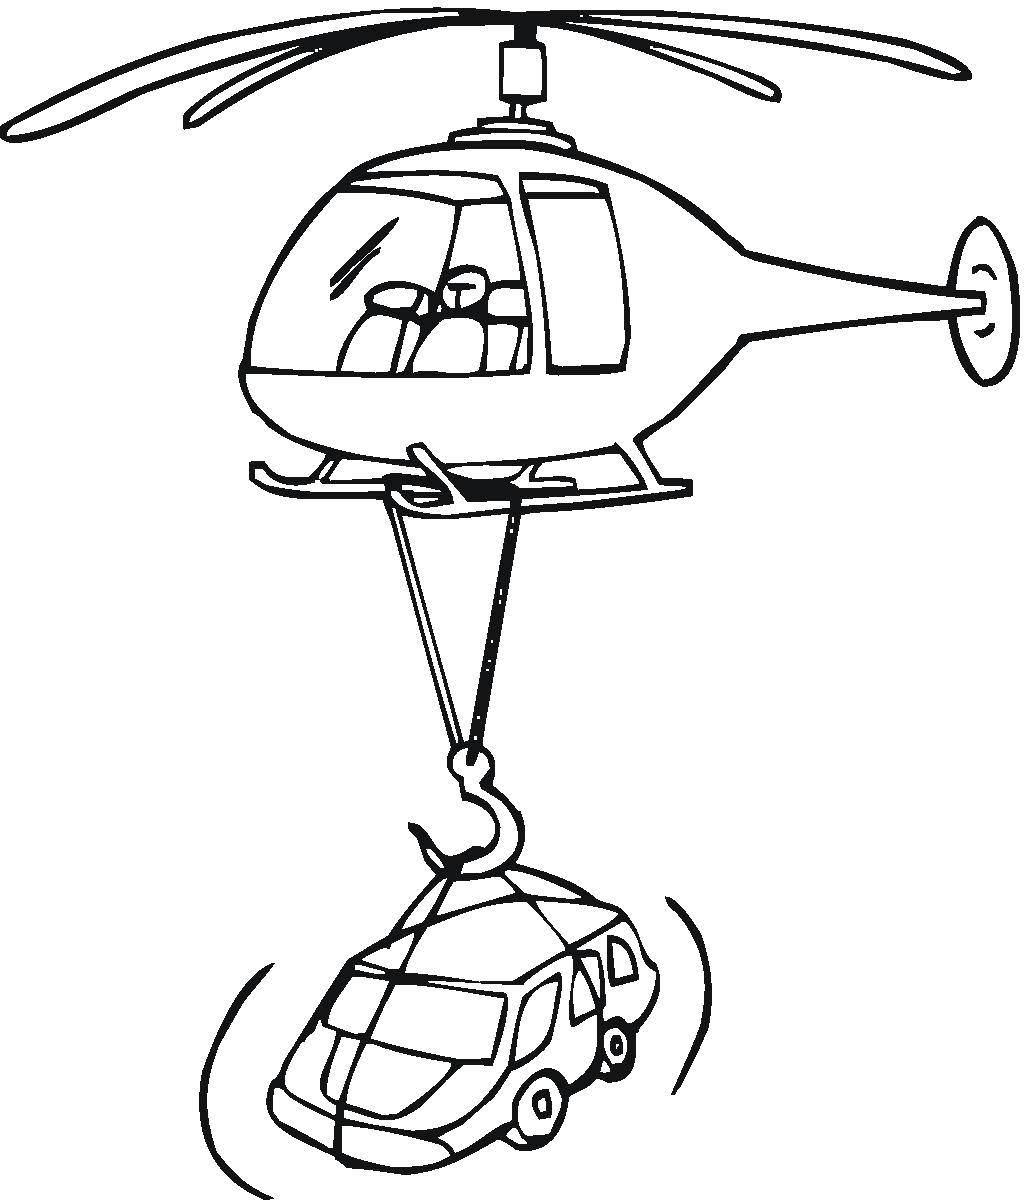 Coloring A helicopter with a car. Category Helicopters. Tags:  Gunship.